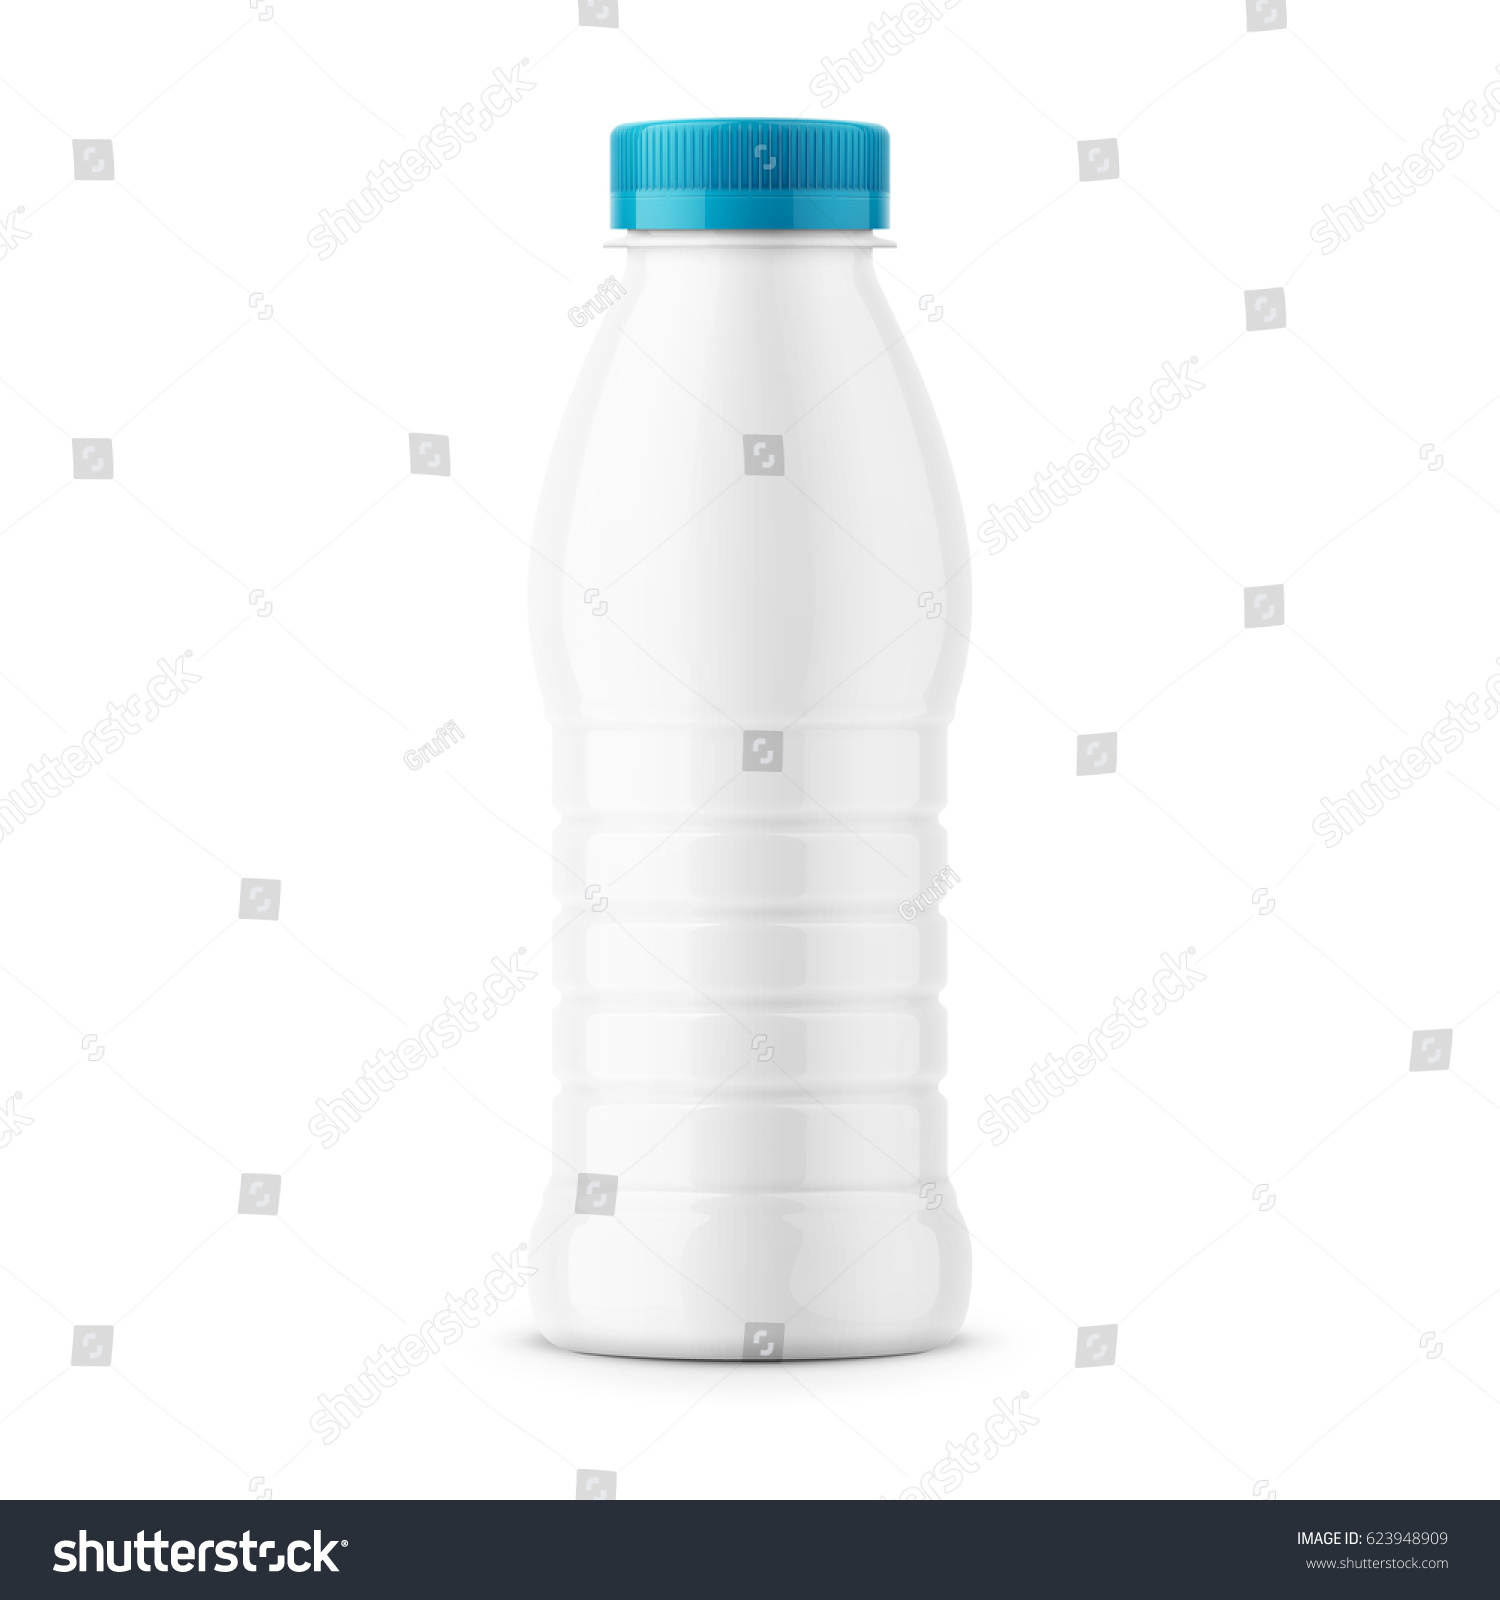 SVG of White glossy plastic bottle with screw cap for dairy products milk, drink yogurt, cream, dessert. 385 ml. Realistic packaging mockup template. Front view. Vector illustration. svg